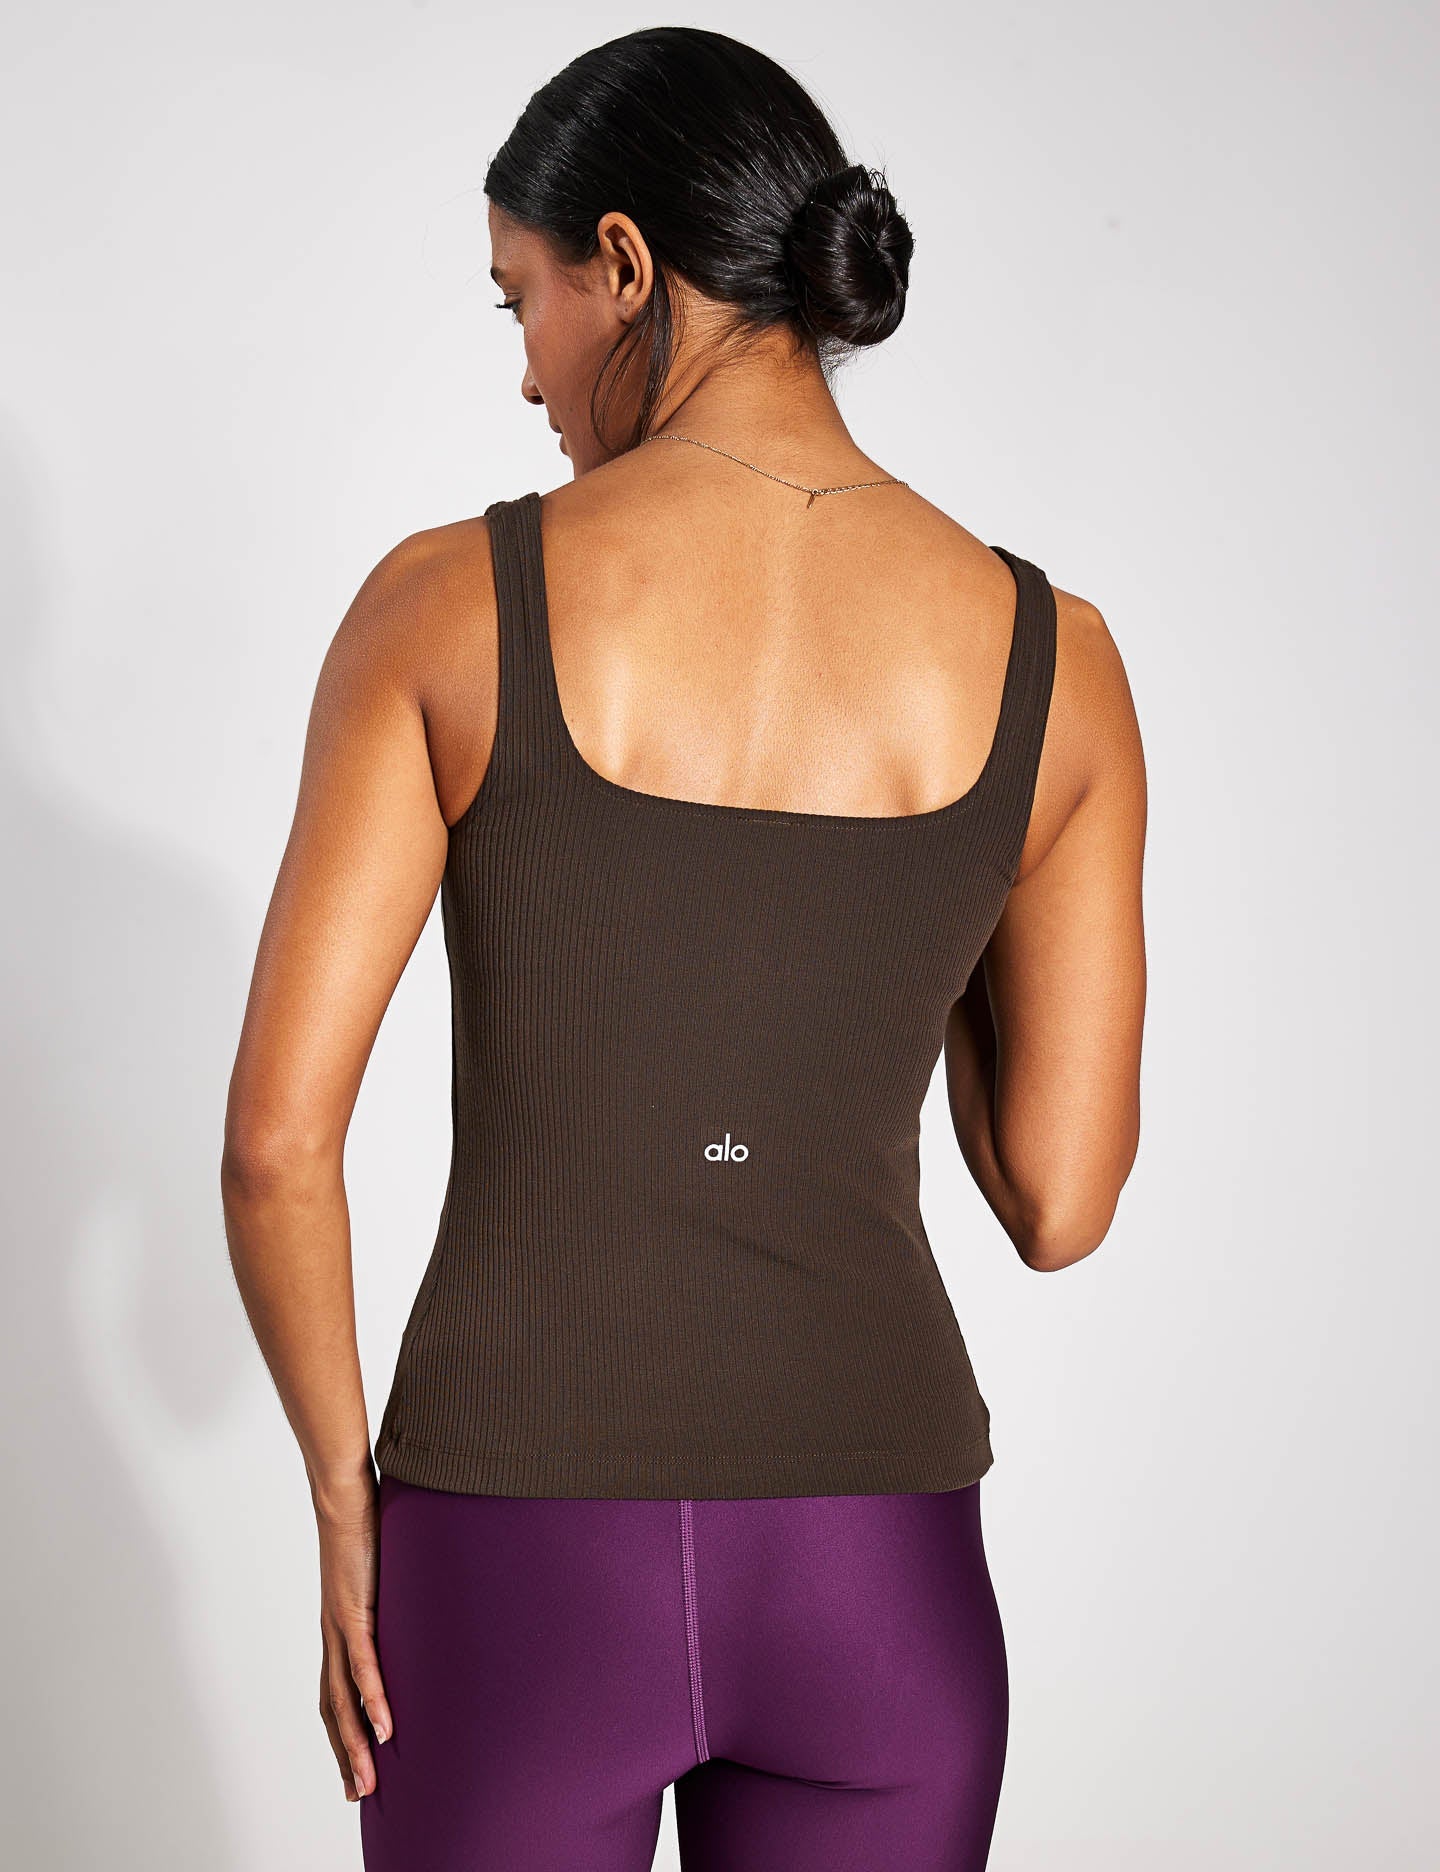 Alo Yoga  Ribbed Minimalist Tank Top in Espresso Brown, Size: XS -  ShopStyle